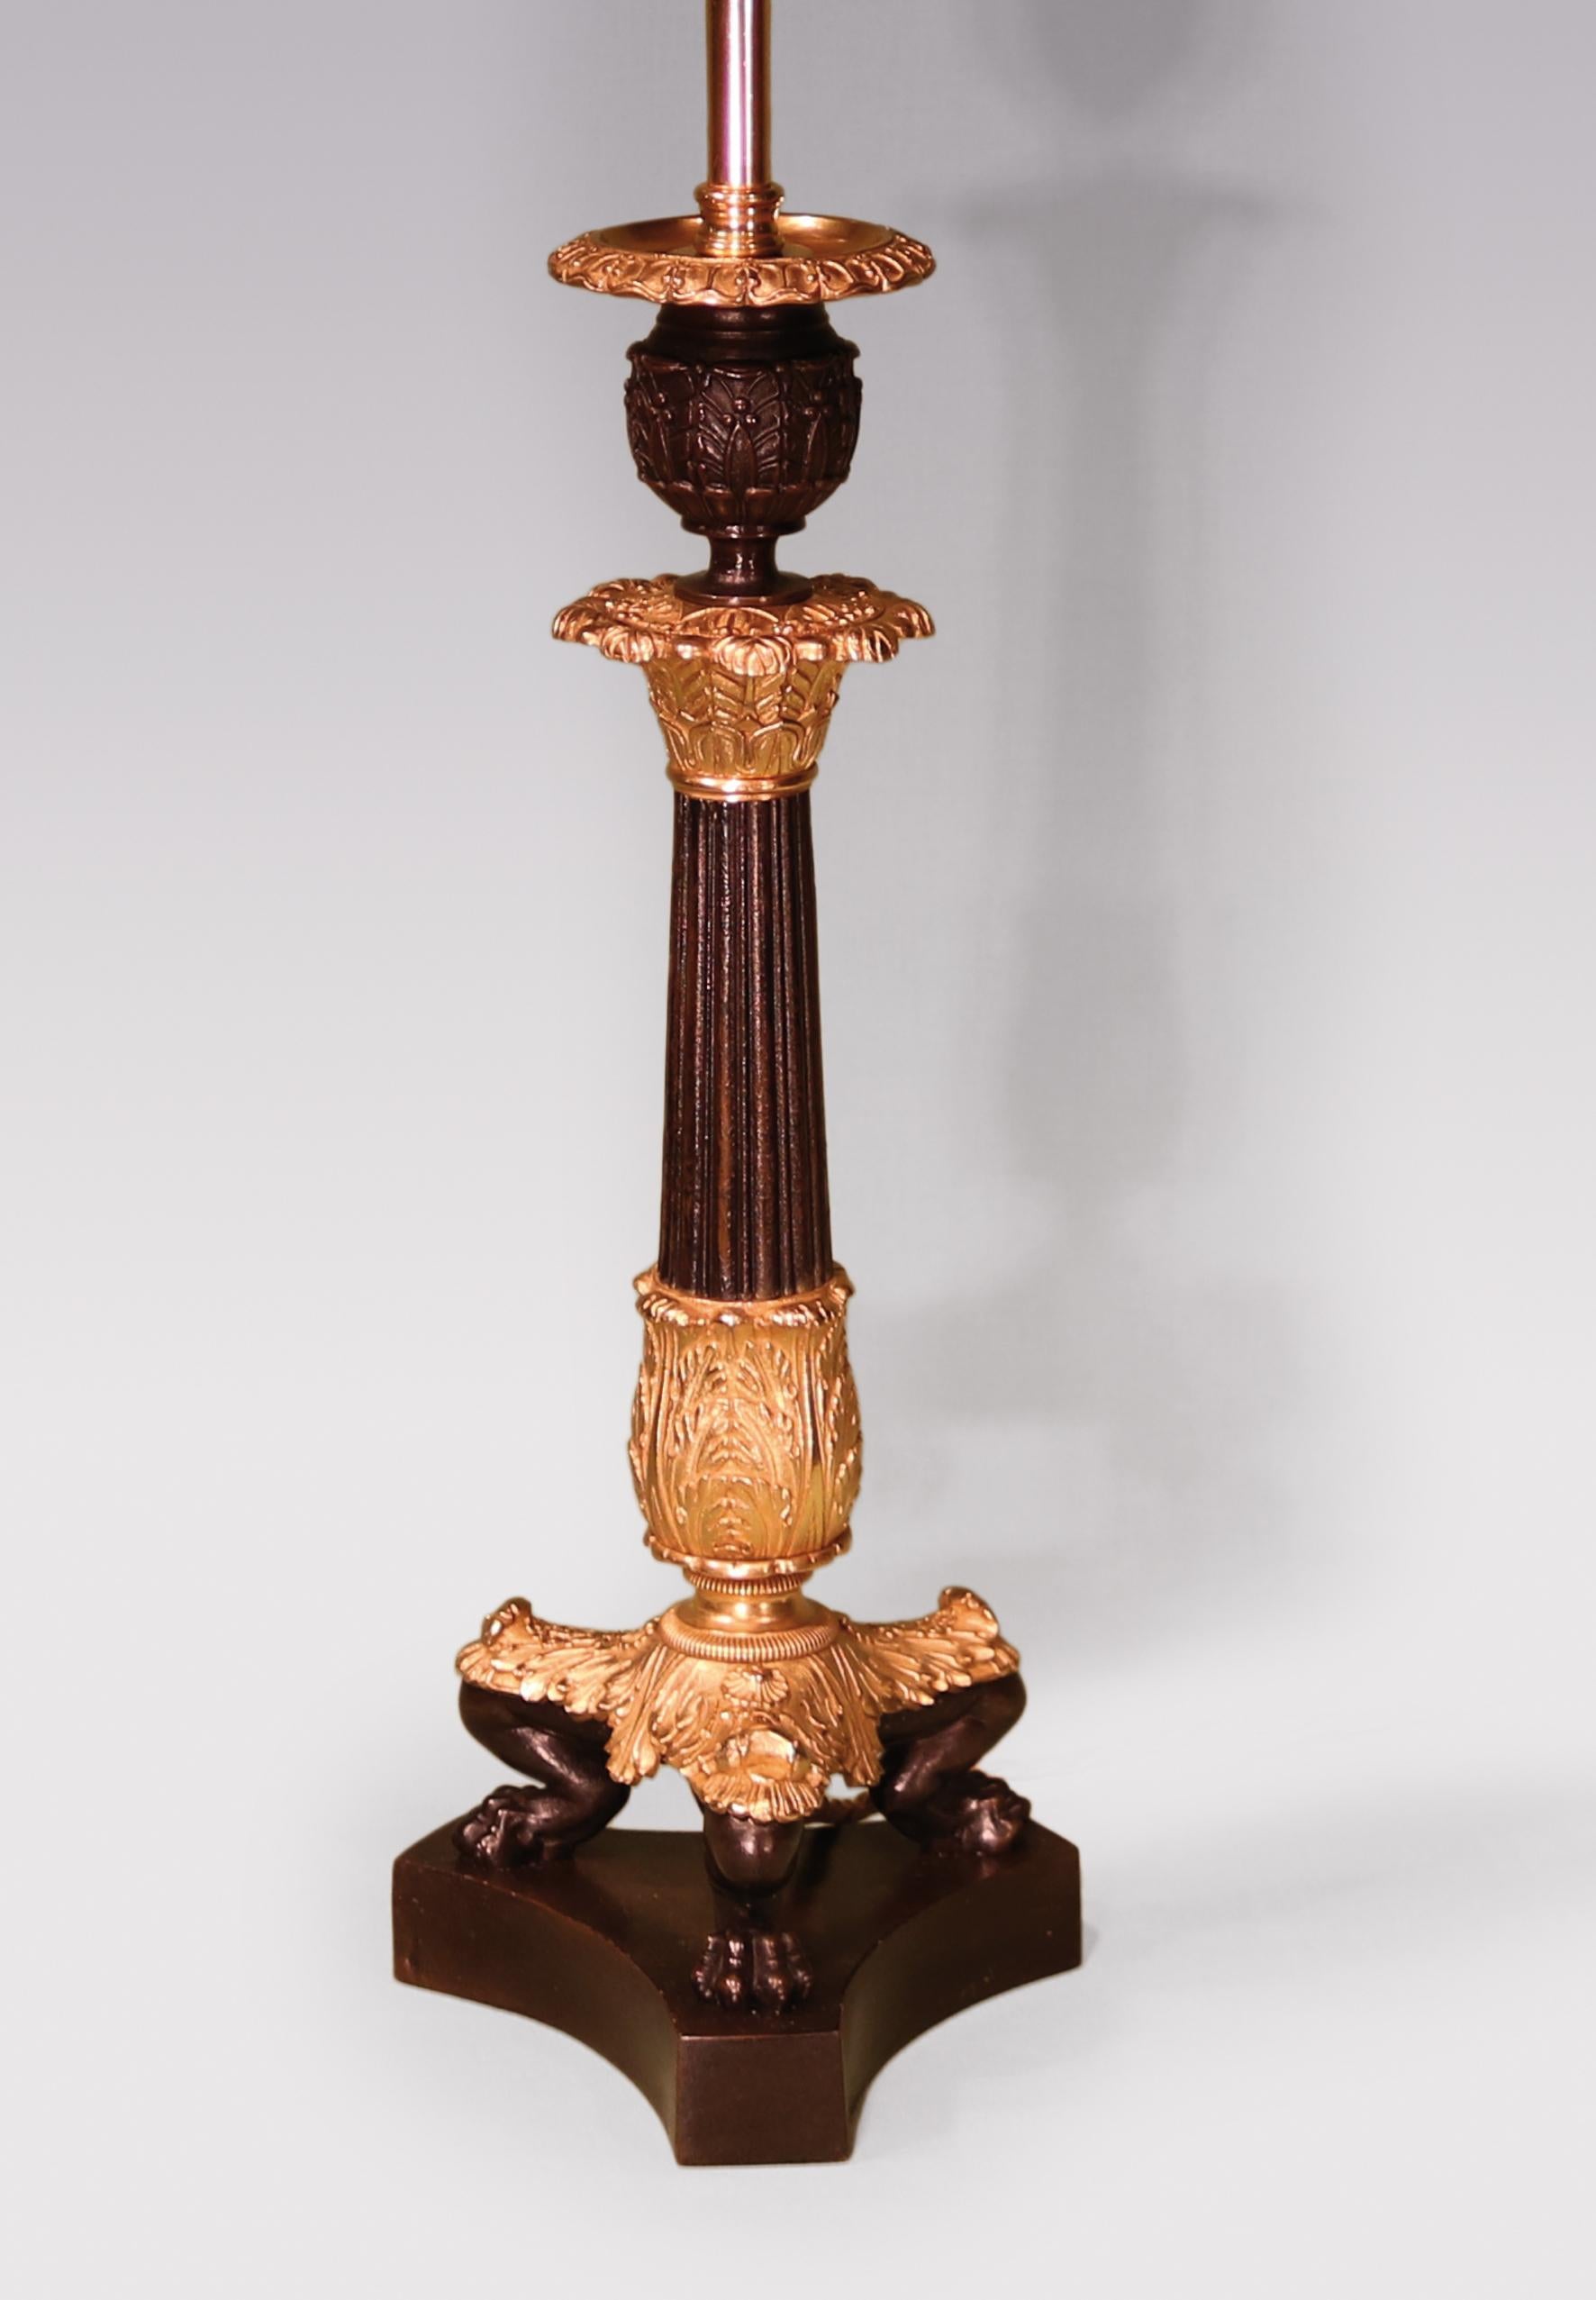 A large early 19th century Regency period bronze and ormolu candlestick having acanthus nozzle above reeded tapering stem supported on acanthus and lions paw tripod legs ending on concave triform platform base. Now converted to electricity.